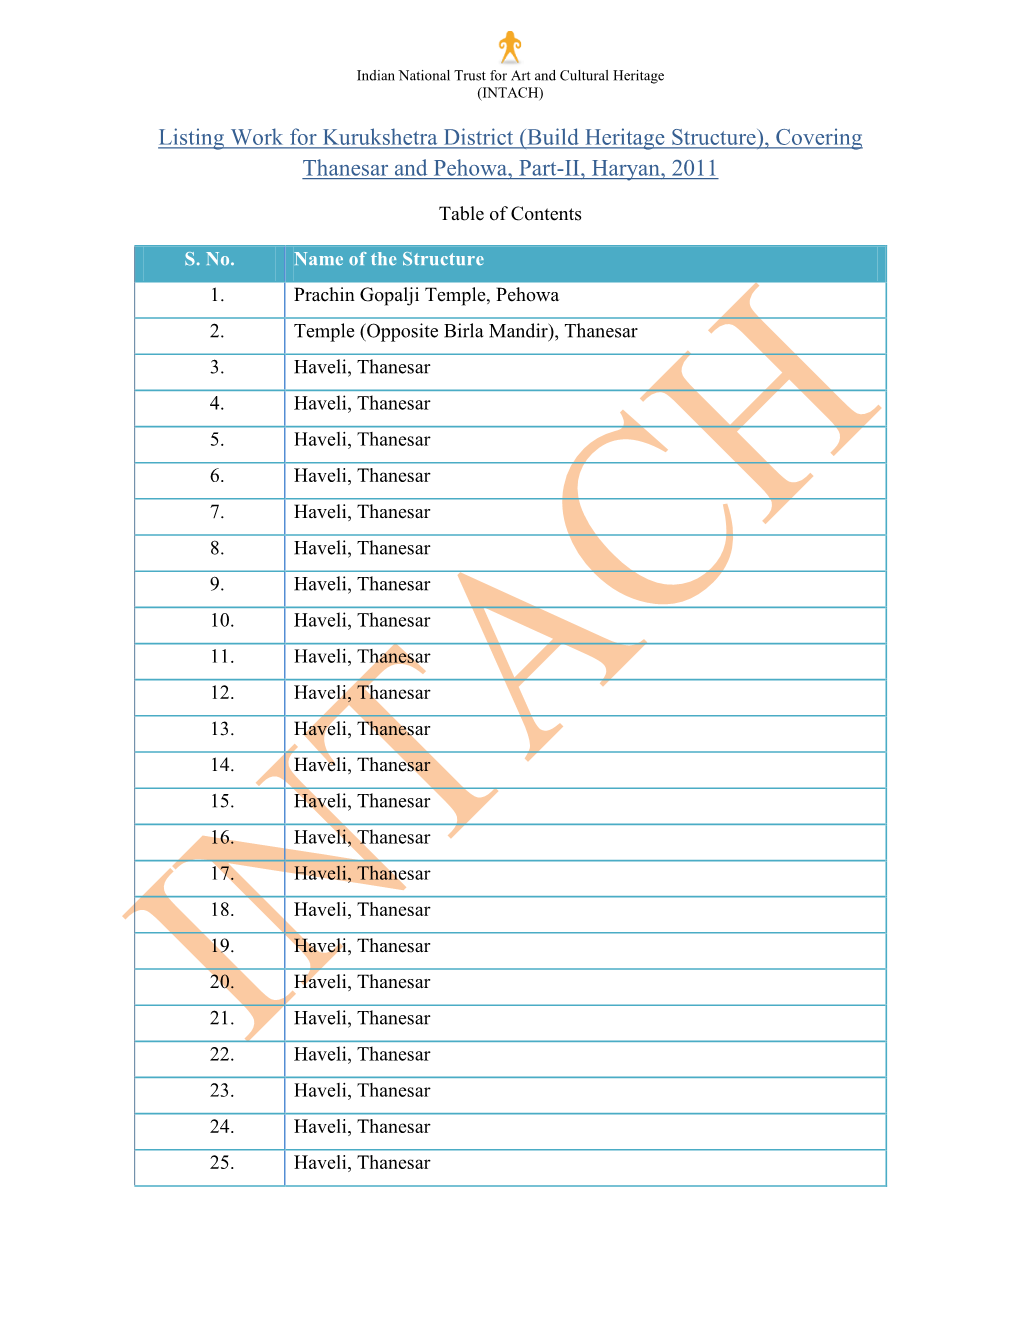 Listing Work for Kurukshetra District (Build Heritage Structure), Covering Thanesar and Pehowa, Part-II, Haryan, 2011